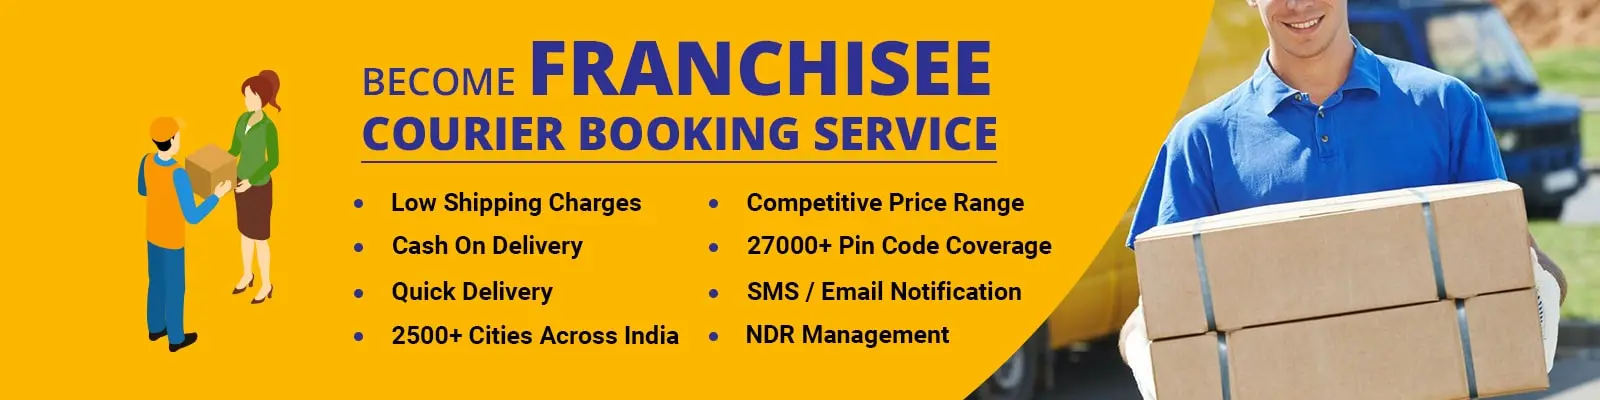 Courier Franchise Business